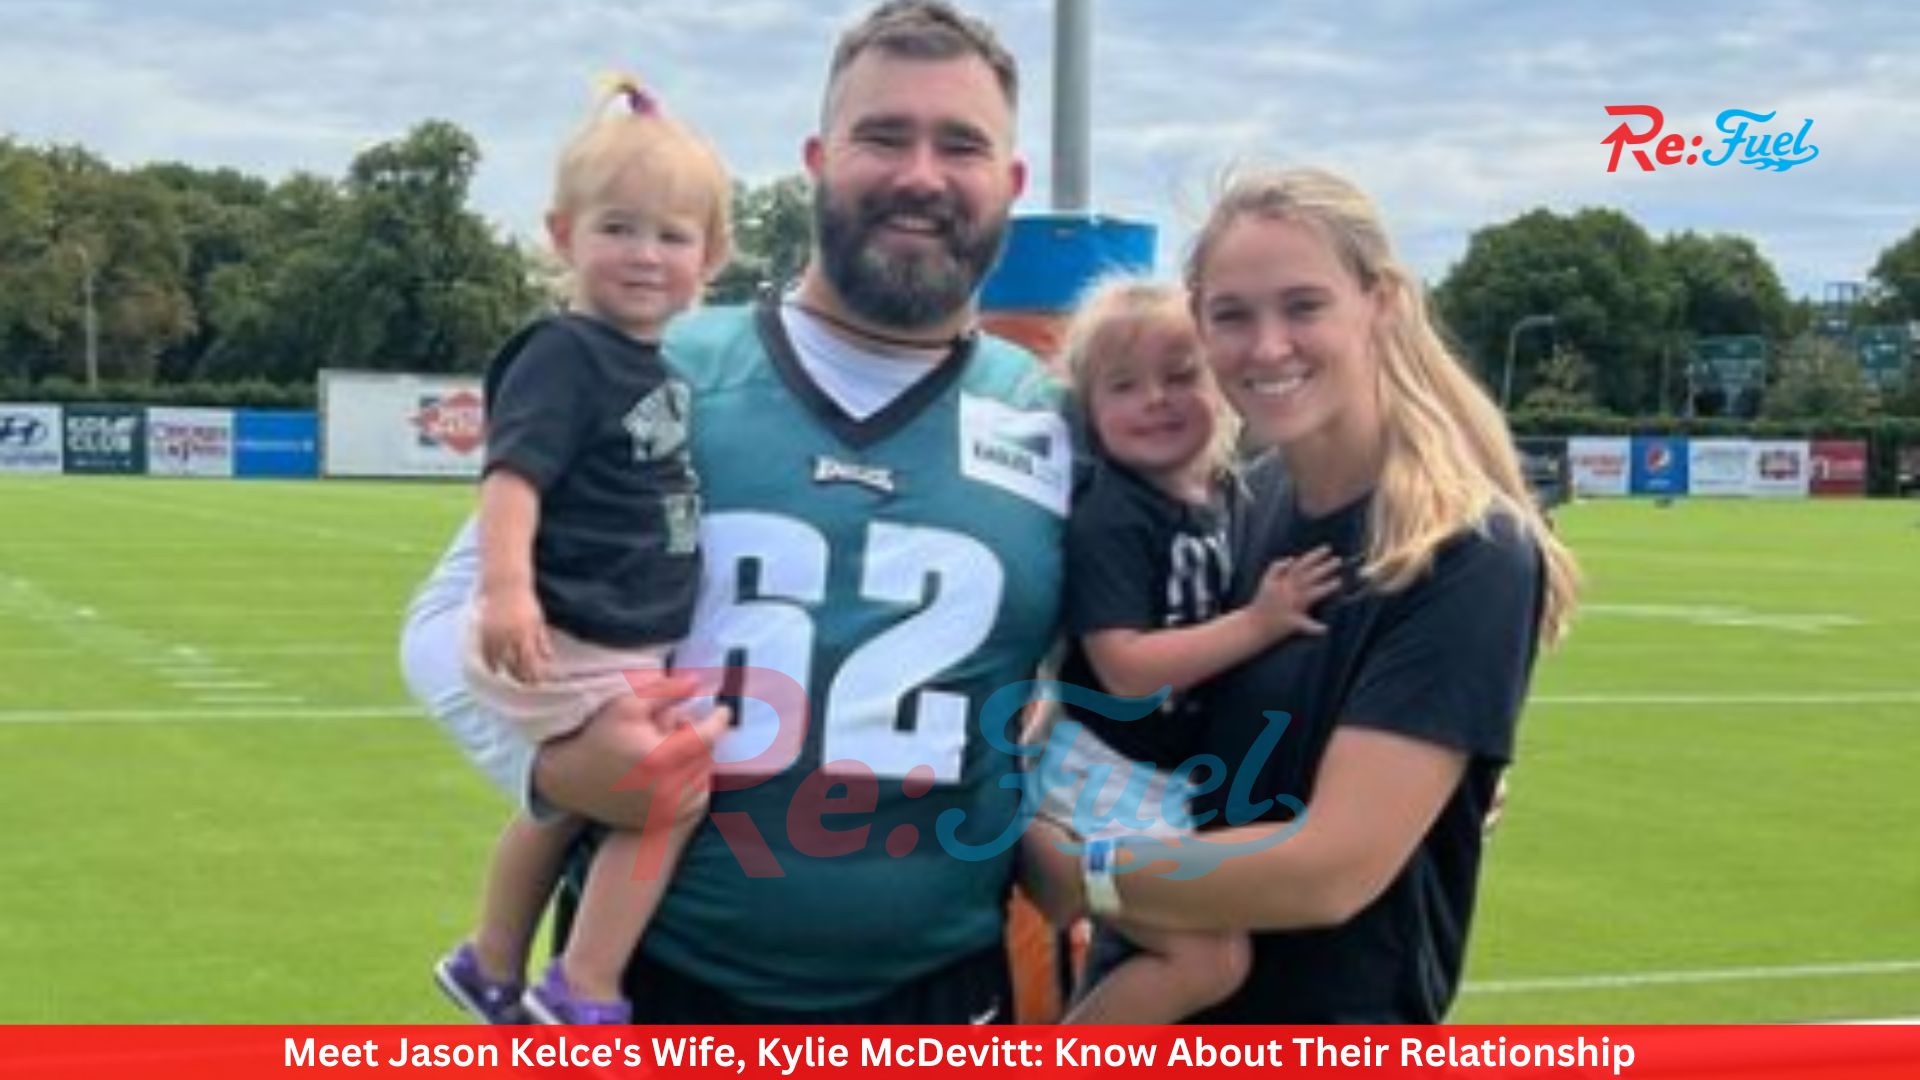 Meet Jason Kelce's Wife, Kylie McDevitt: Know About Their Relationship